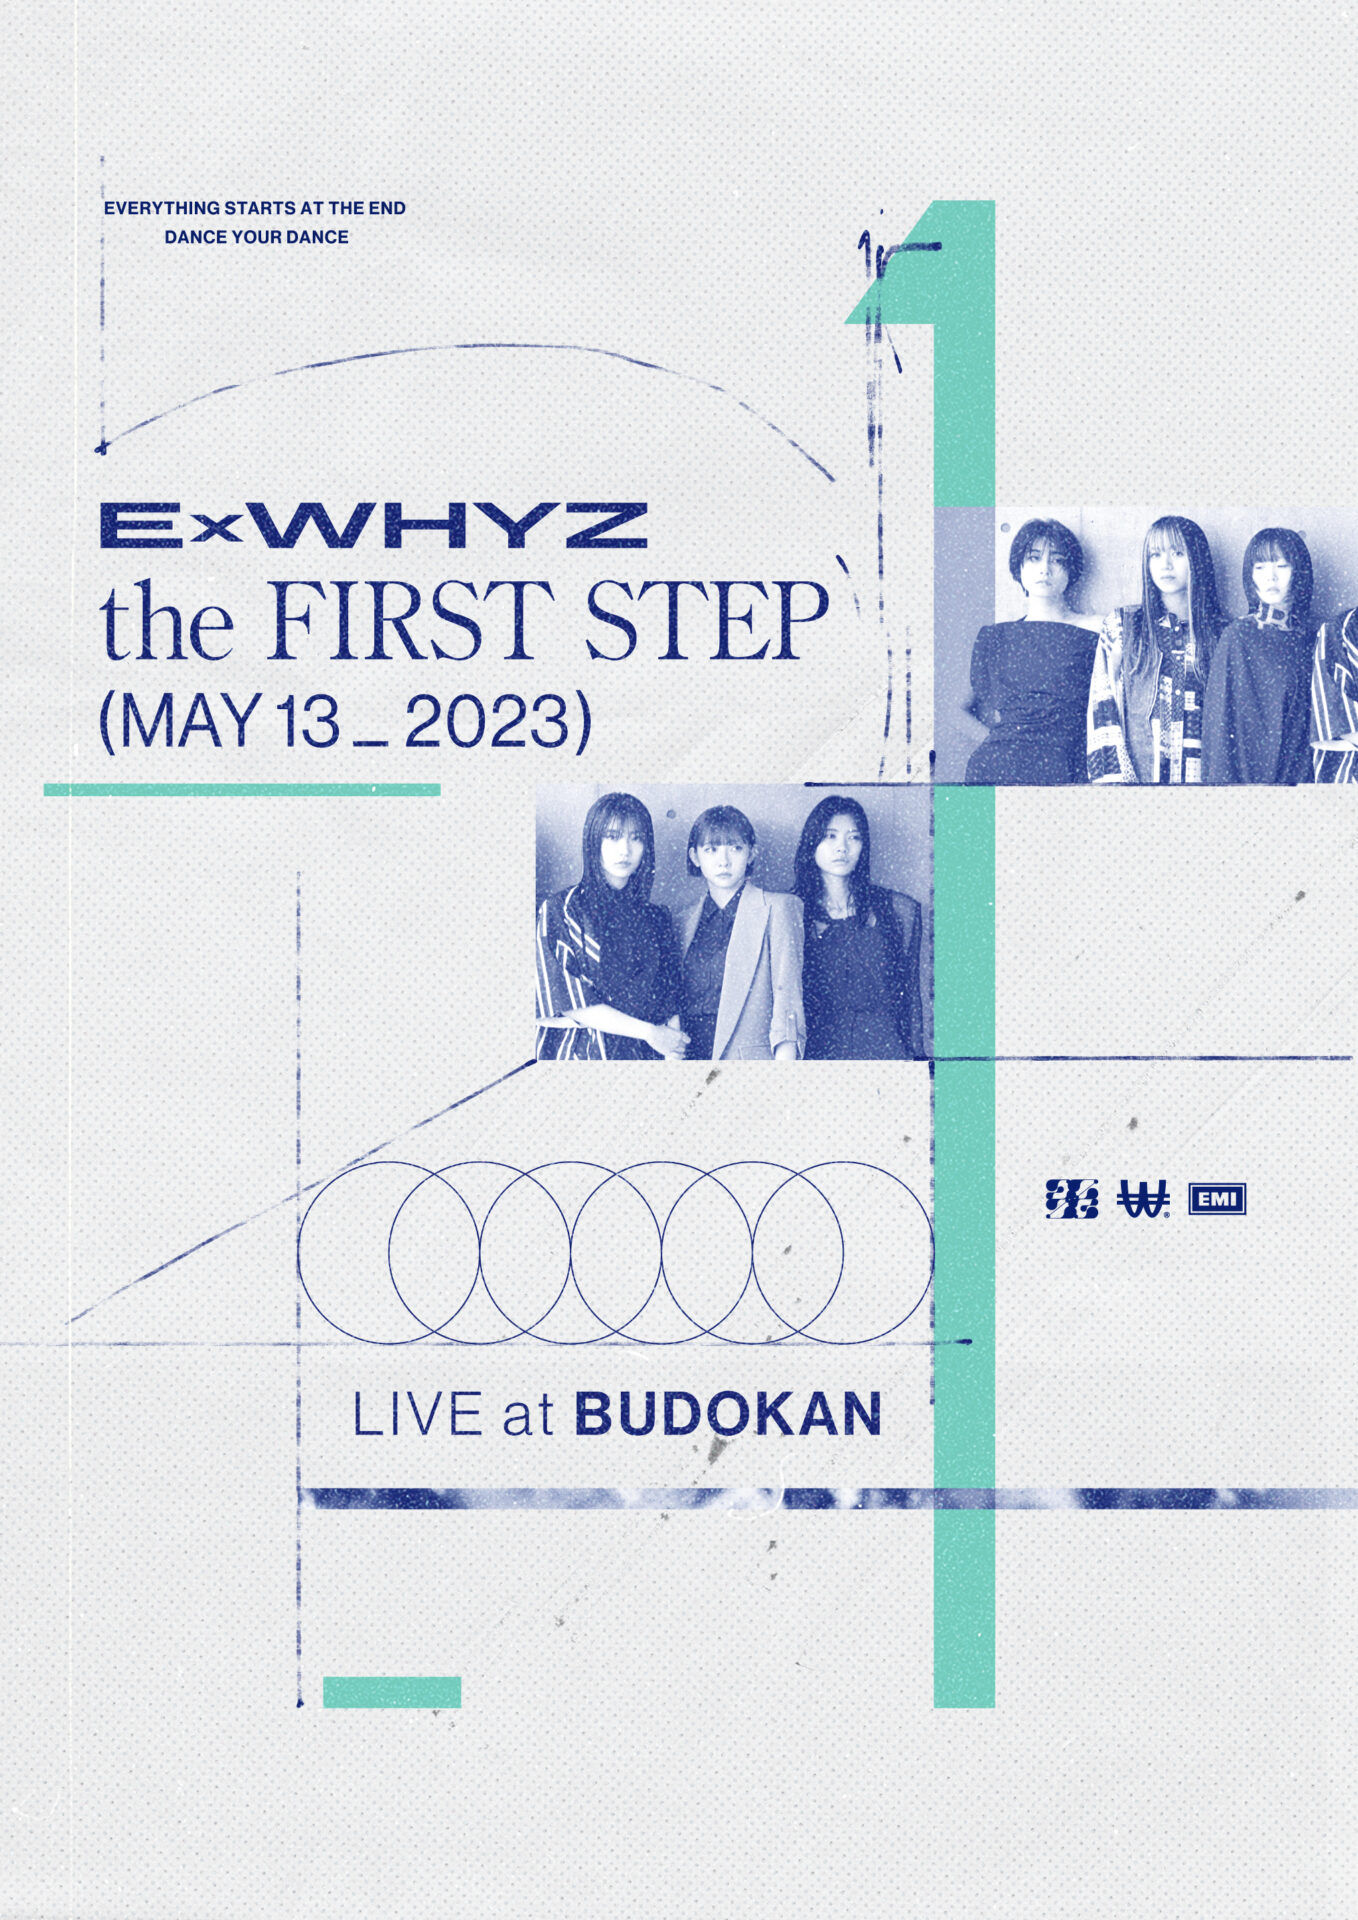 ExWHYZ LIVE at BUDOKAN “the FIRST STEP” MAIN VISUAL